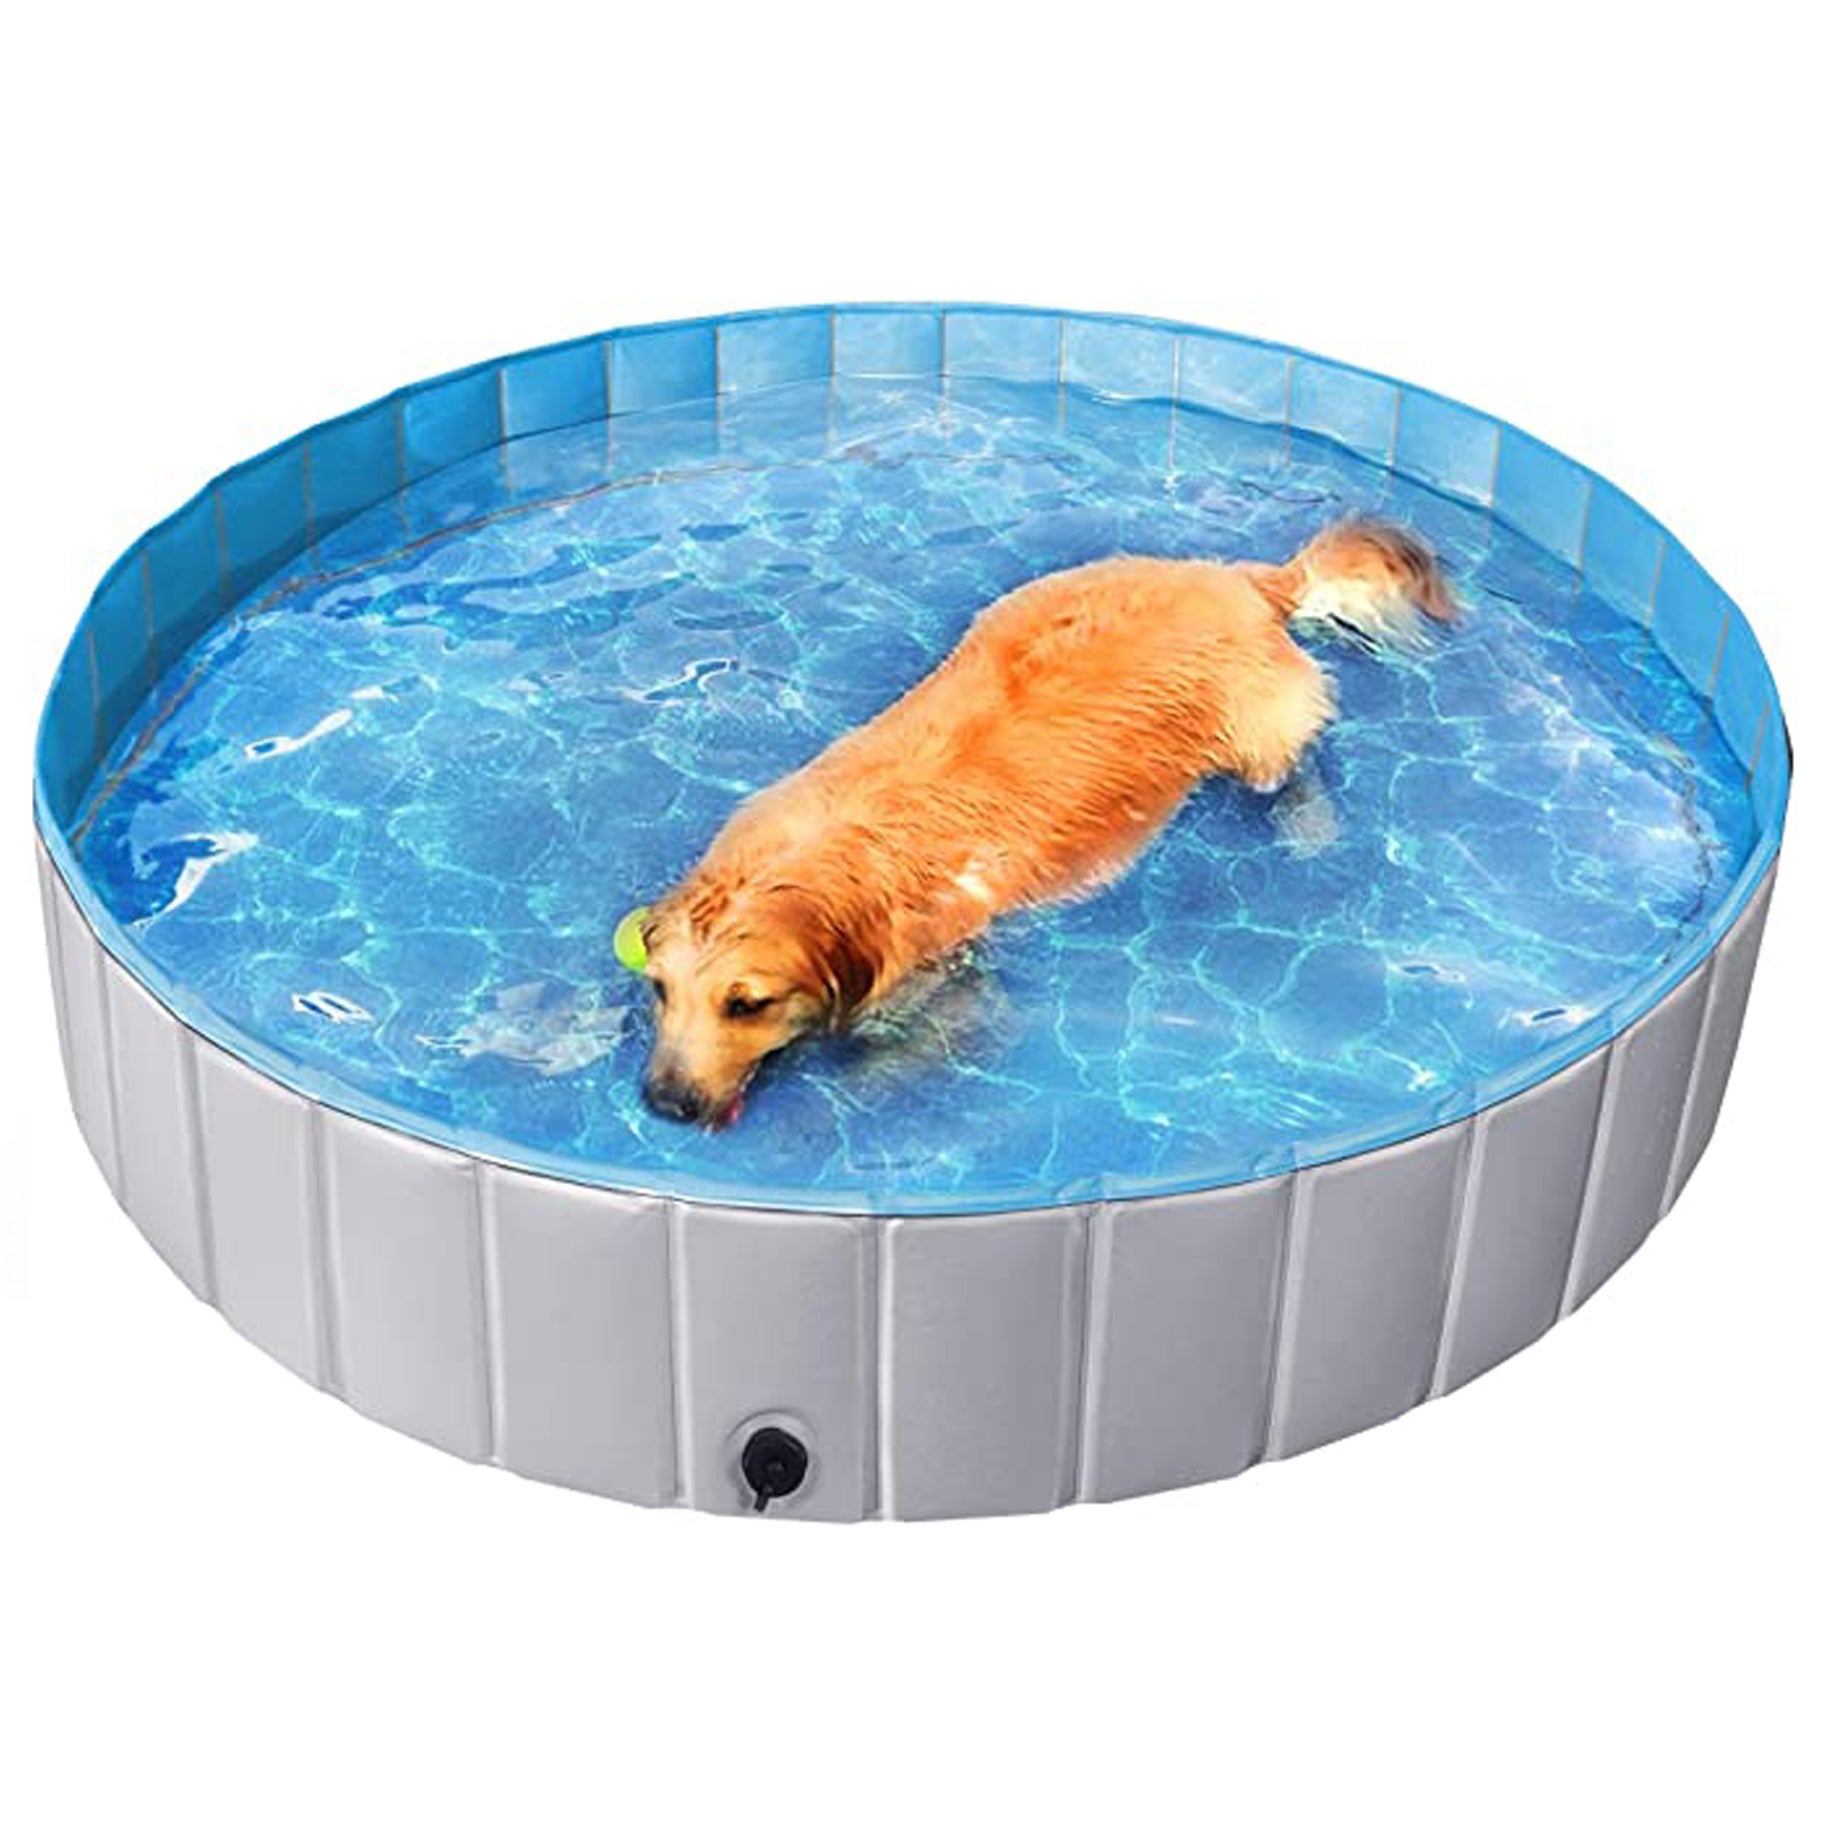 Mini padding pool 50x10cm ideal for holiday/balconys/patios even dogs. 